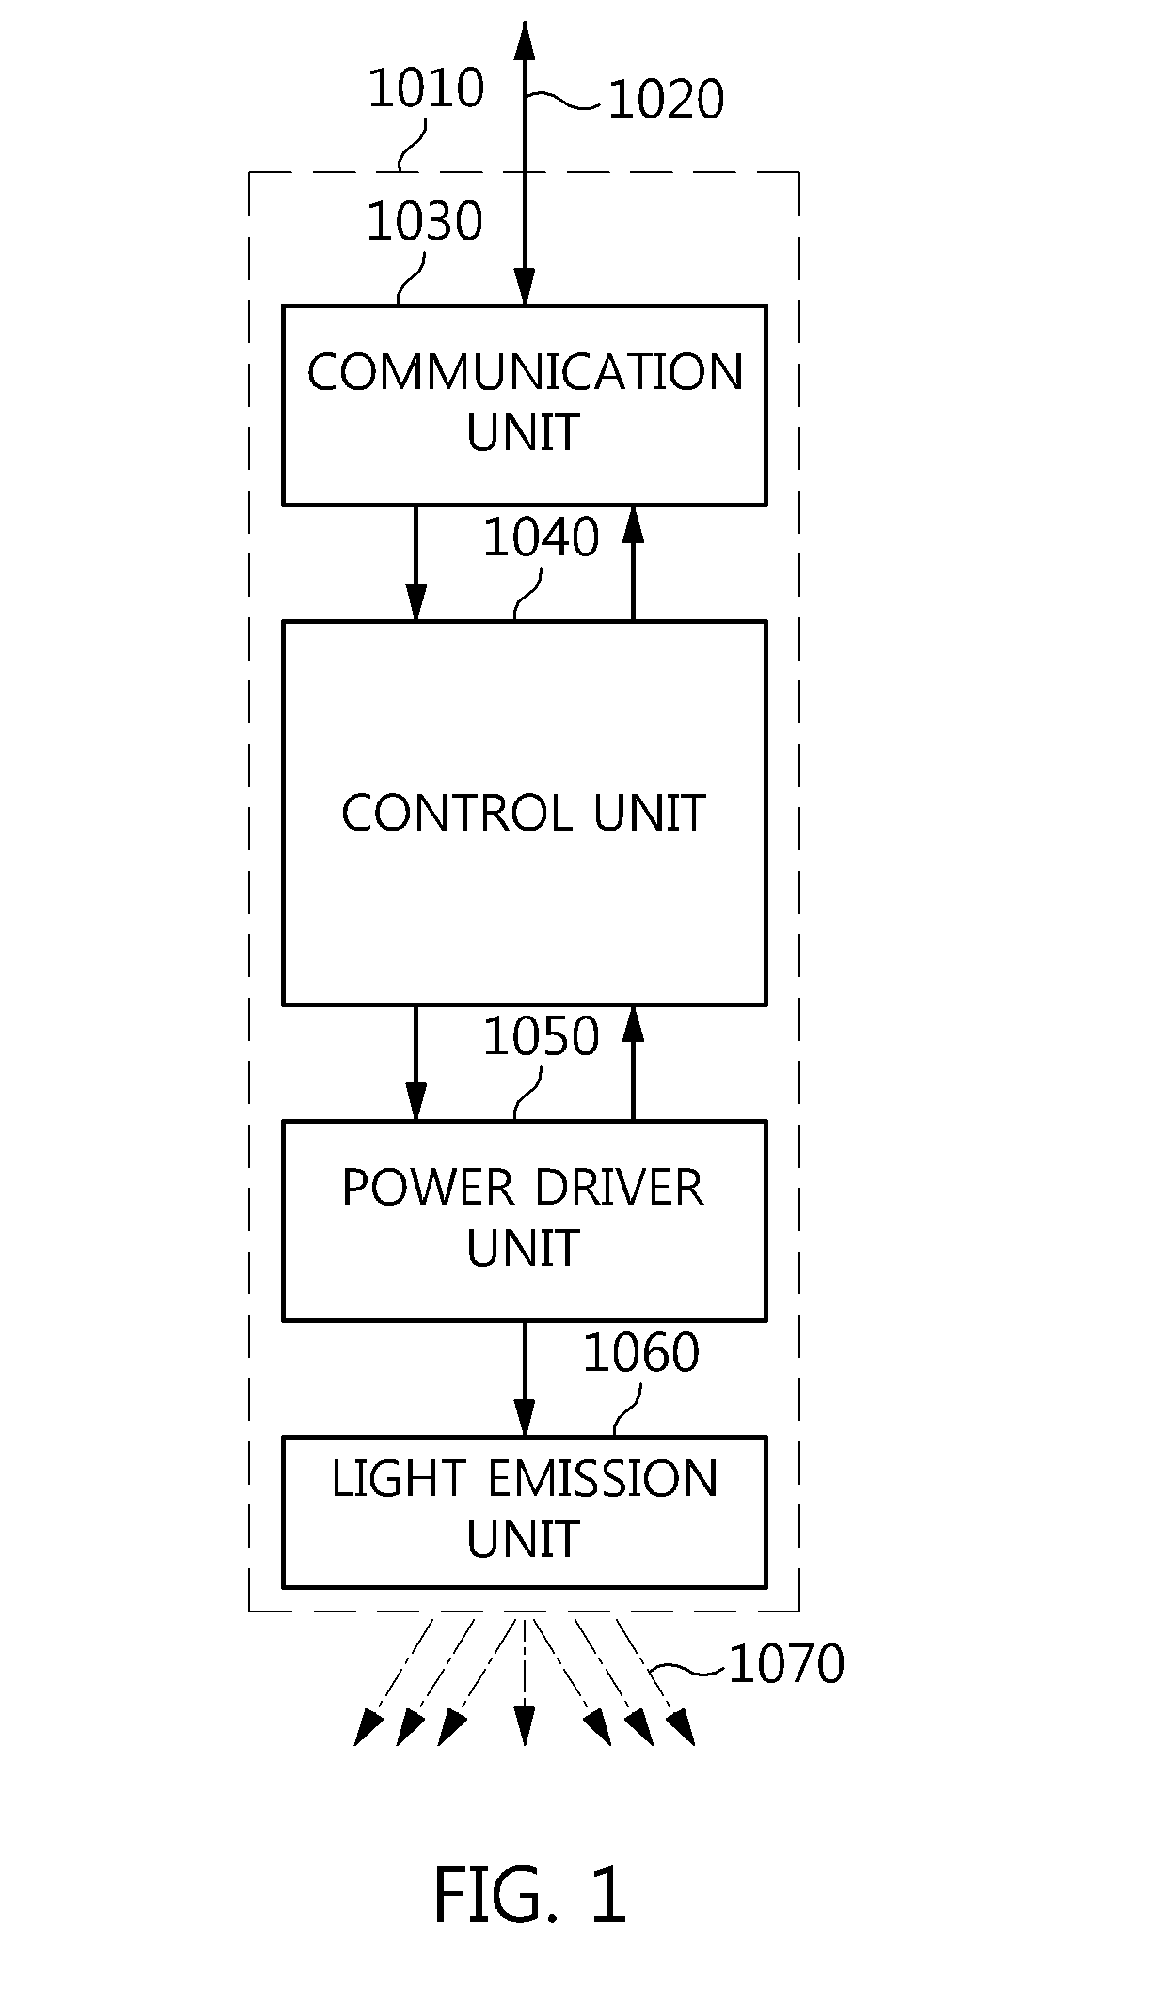 Apparatus and method for detecting error and variation in light-emitting diode lightting